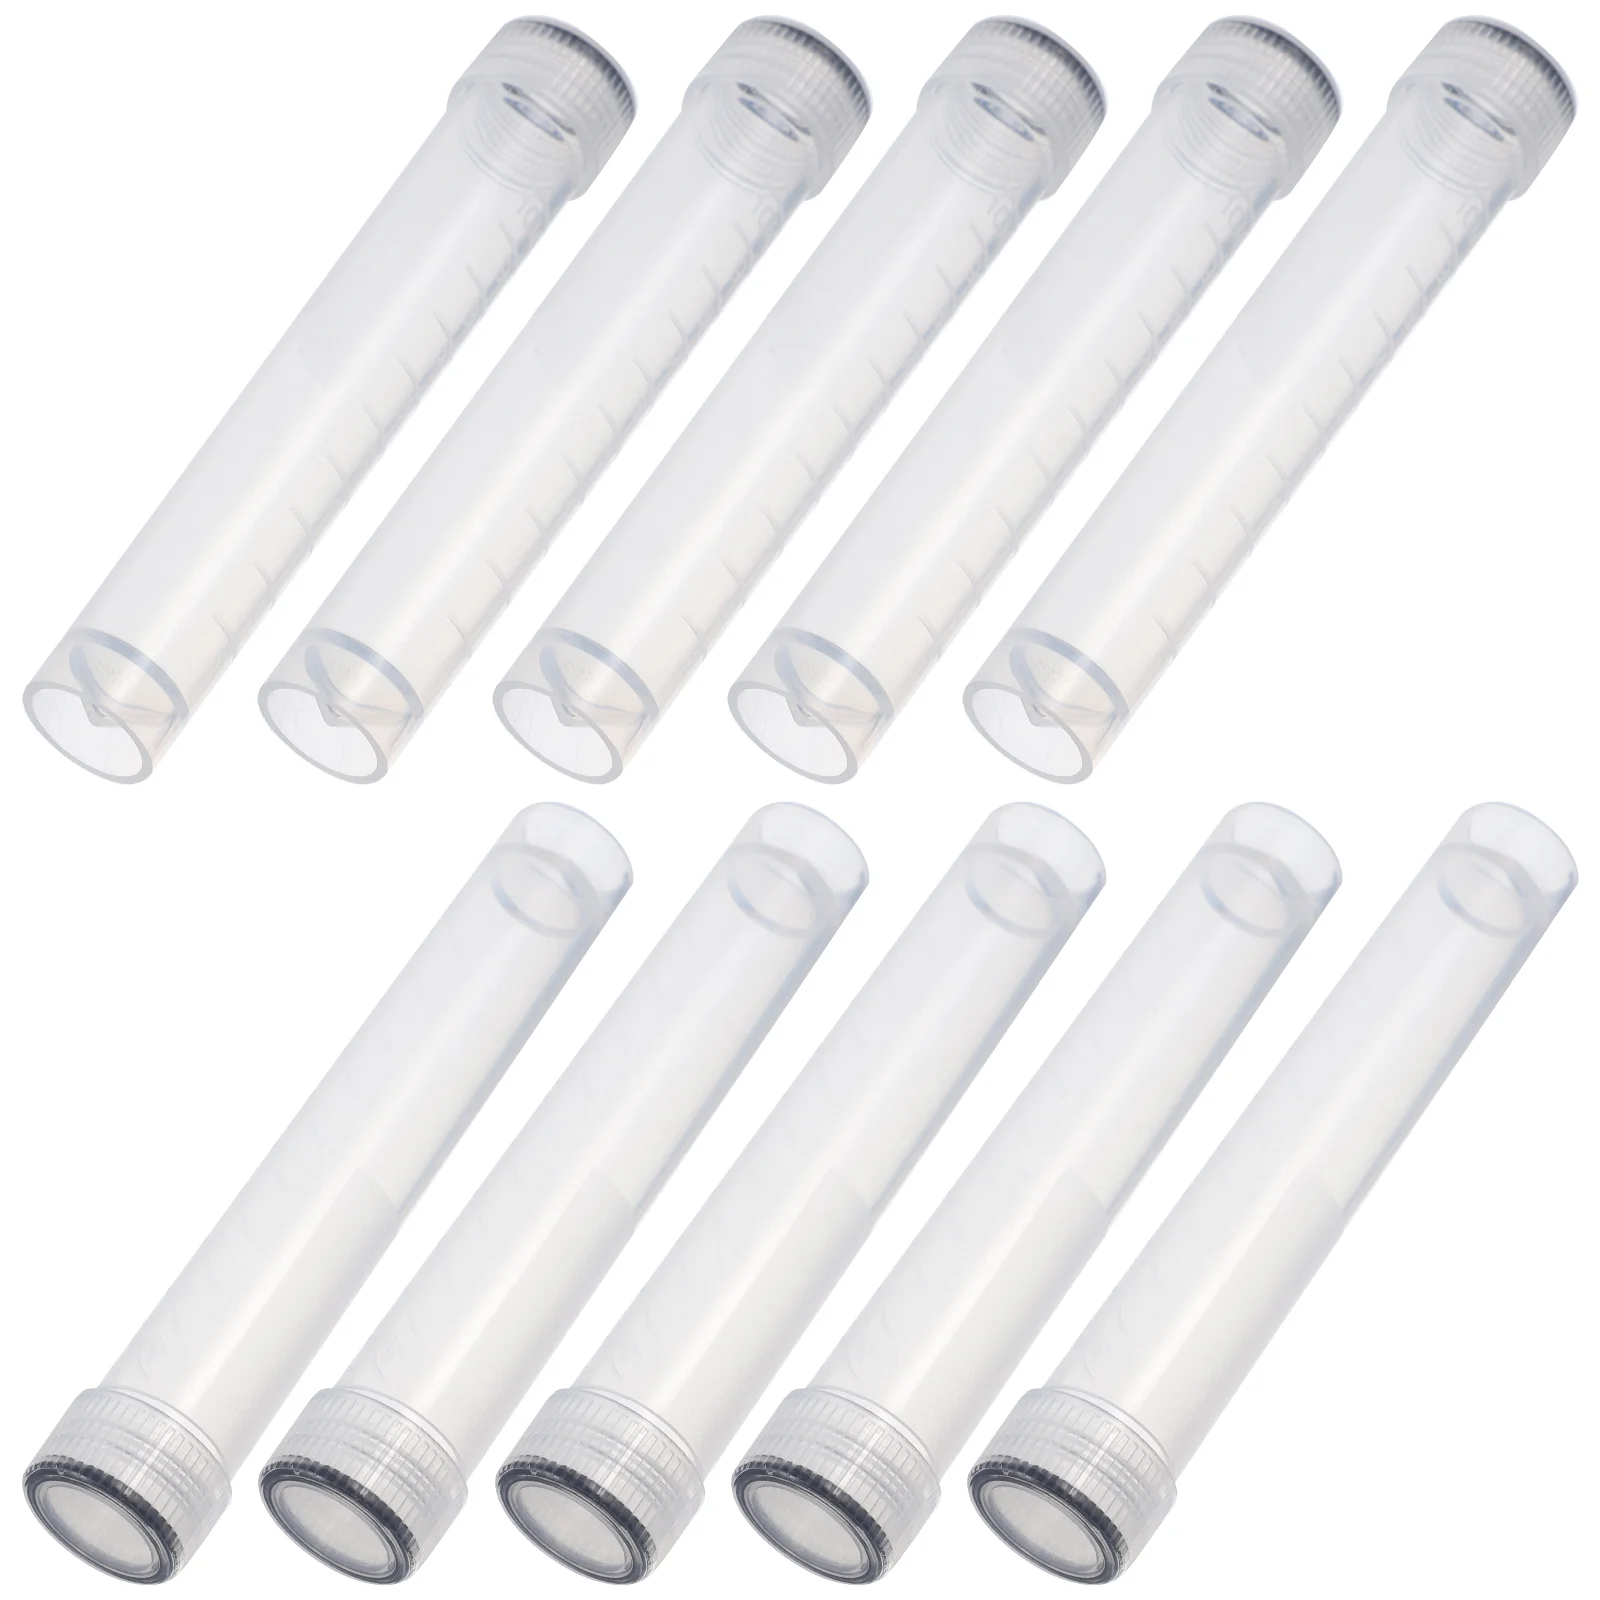 

10 Pcs Cryovial Freezing Tube Tubes Lids Plastic Sample Clear Flat Test Containers